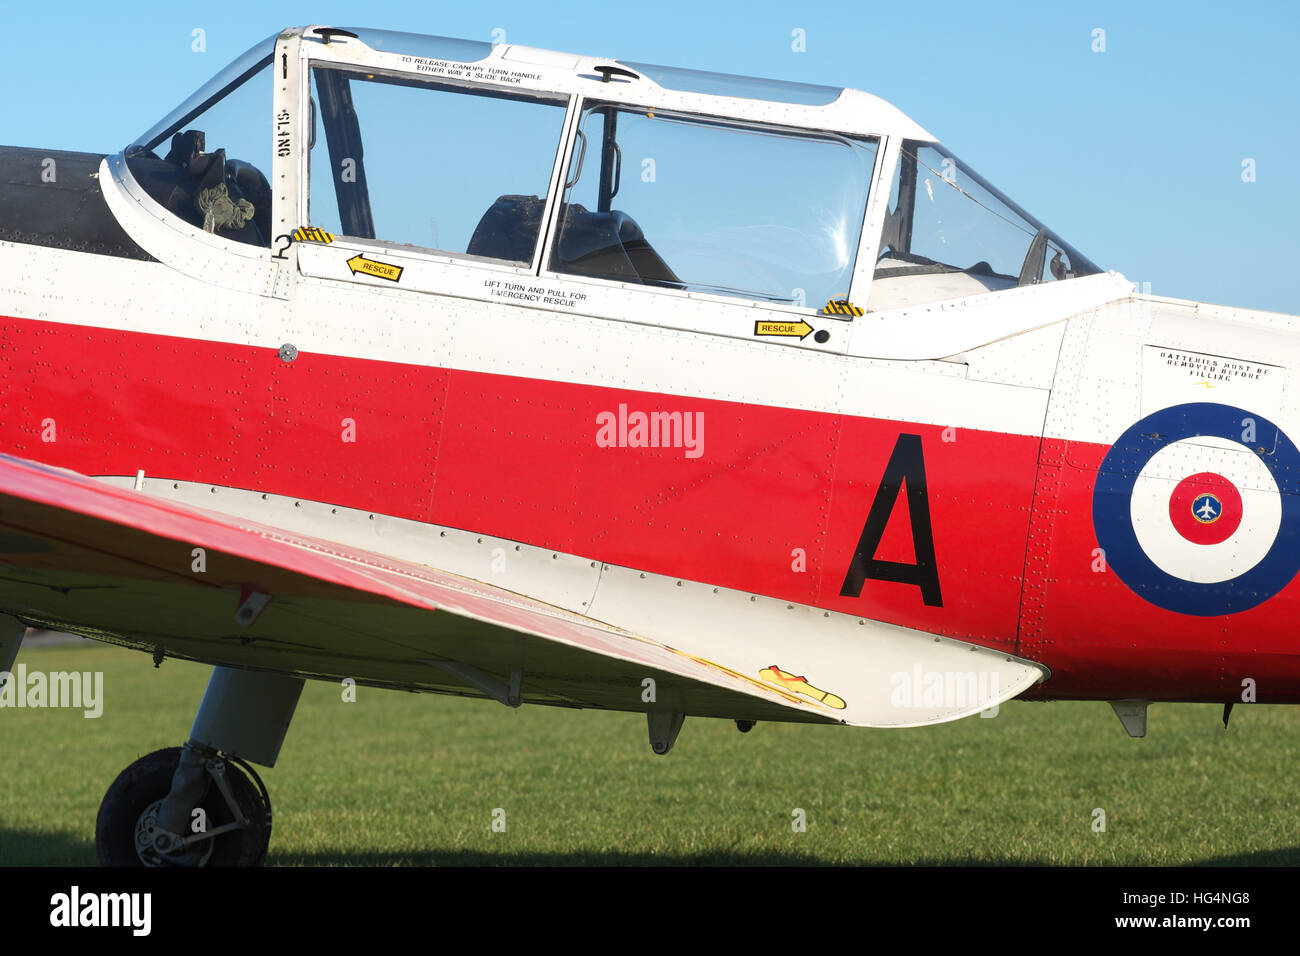 DHC 1 Chipmunk a basic training aircraft built in the 1950s and used by the RAF and Army Air Corps through to the 1980s in the UK Stock Photo